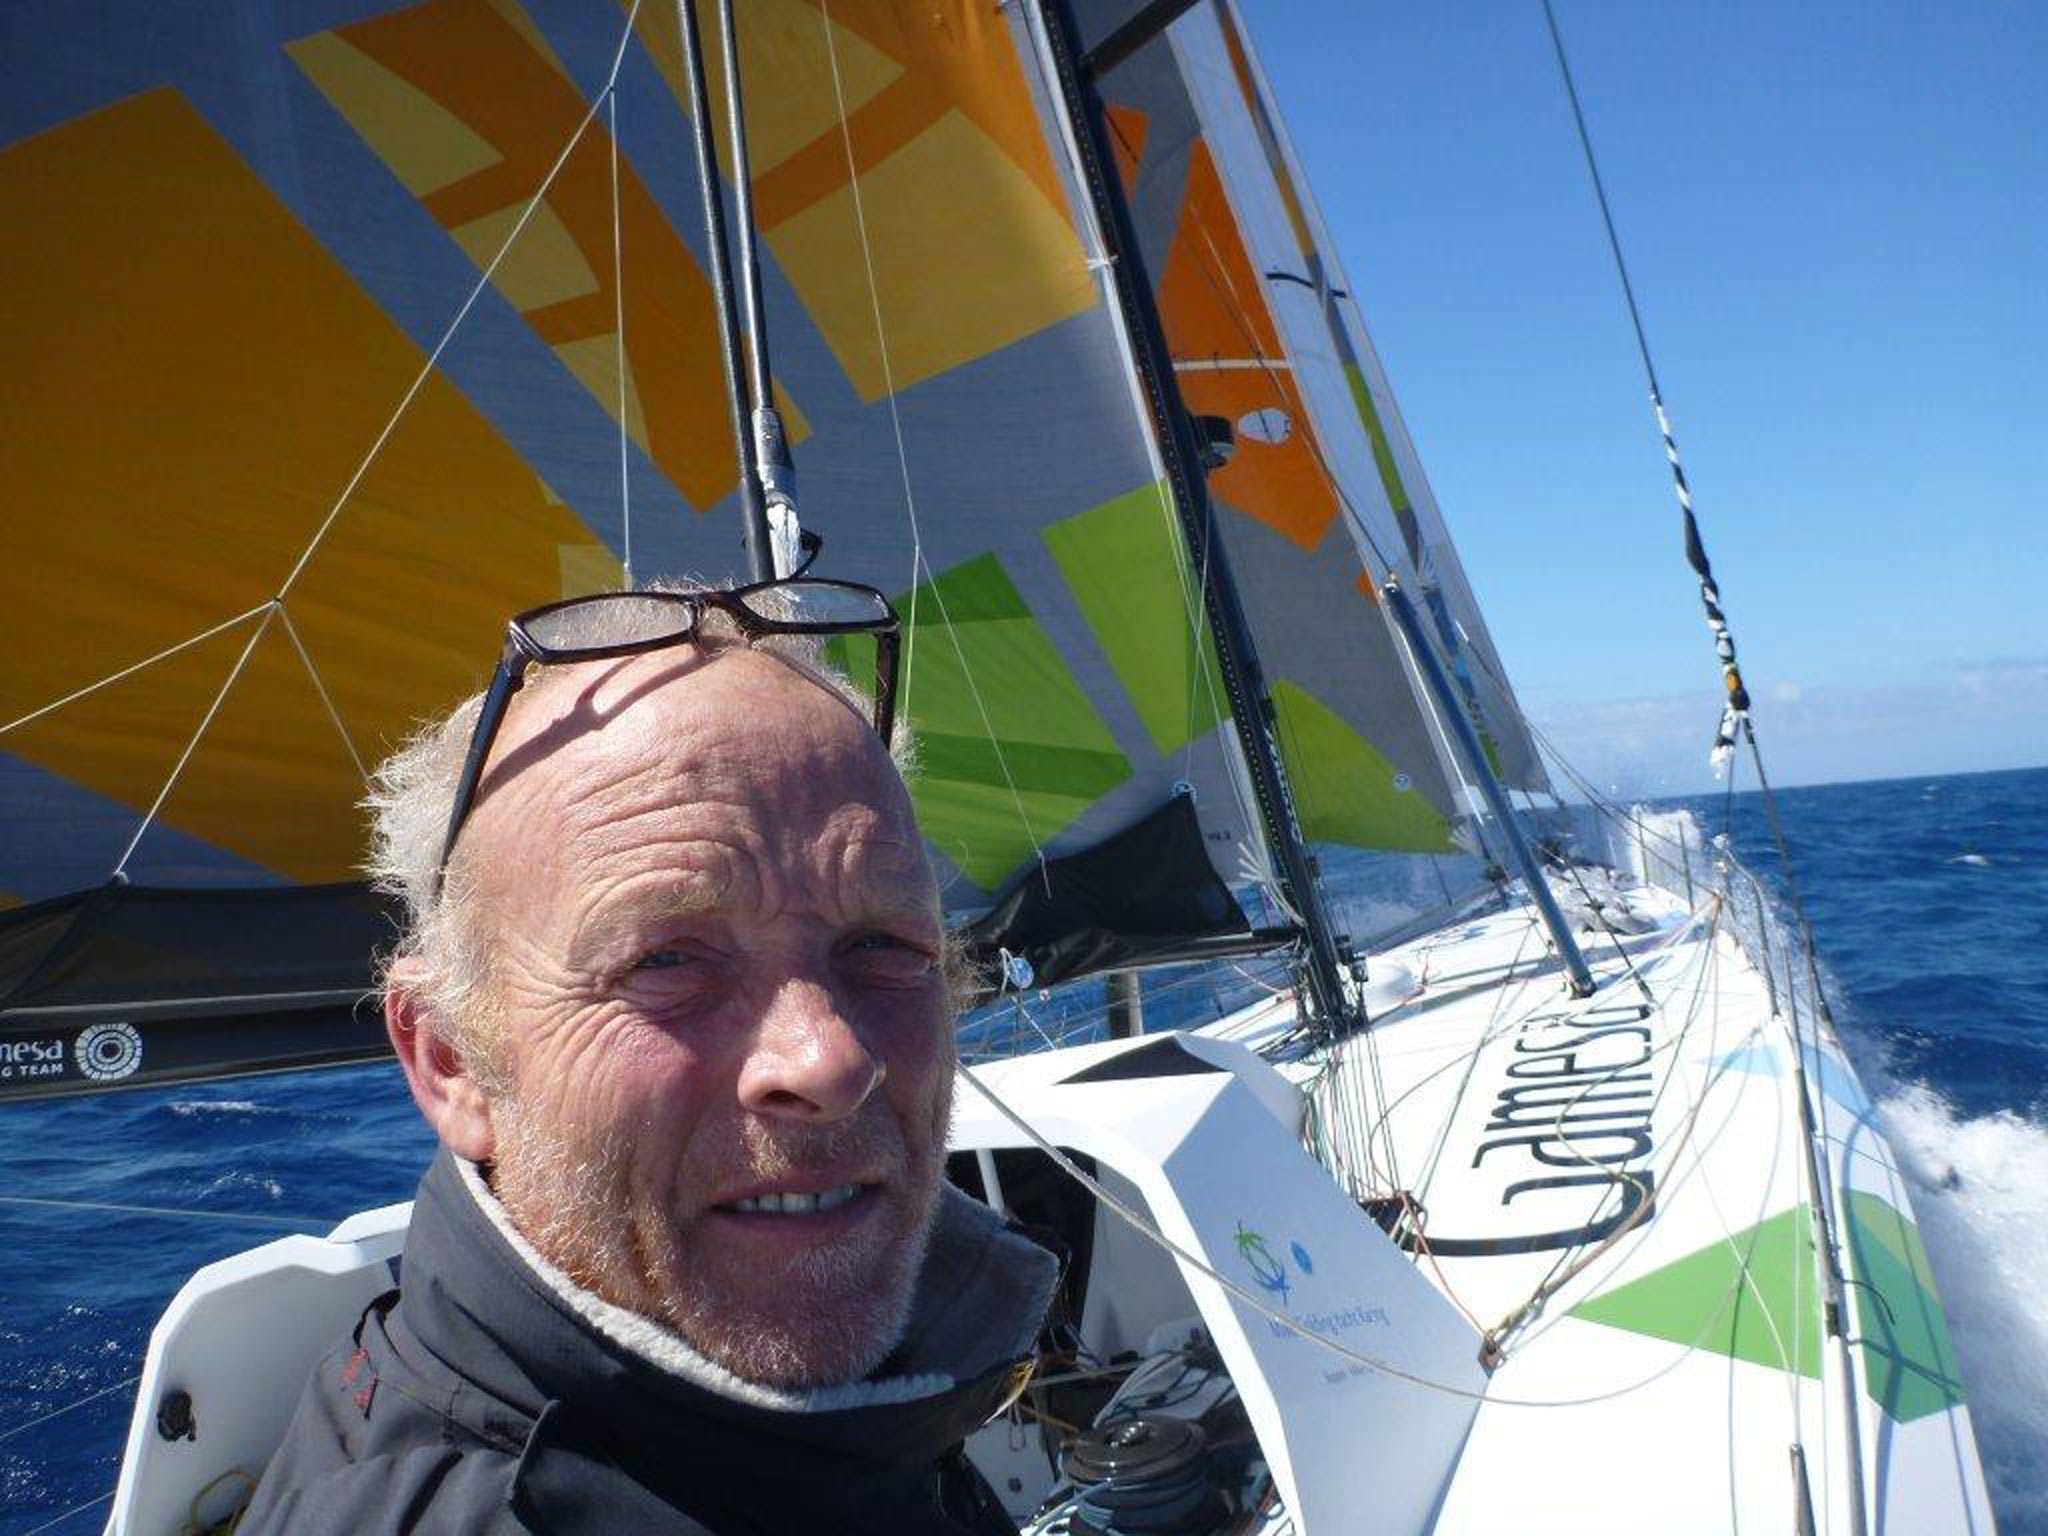 Mike Golding has completed his third, and probably last, Vendée Globe singlehanded non-stop round the world race in his 60-foot Gamesa